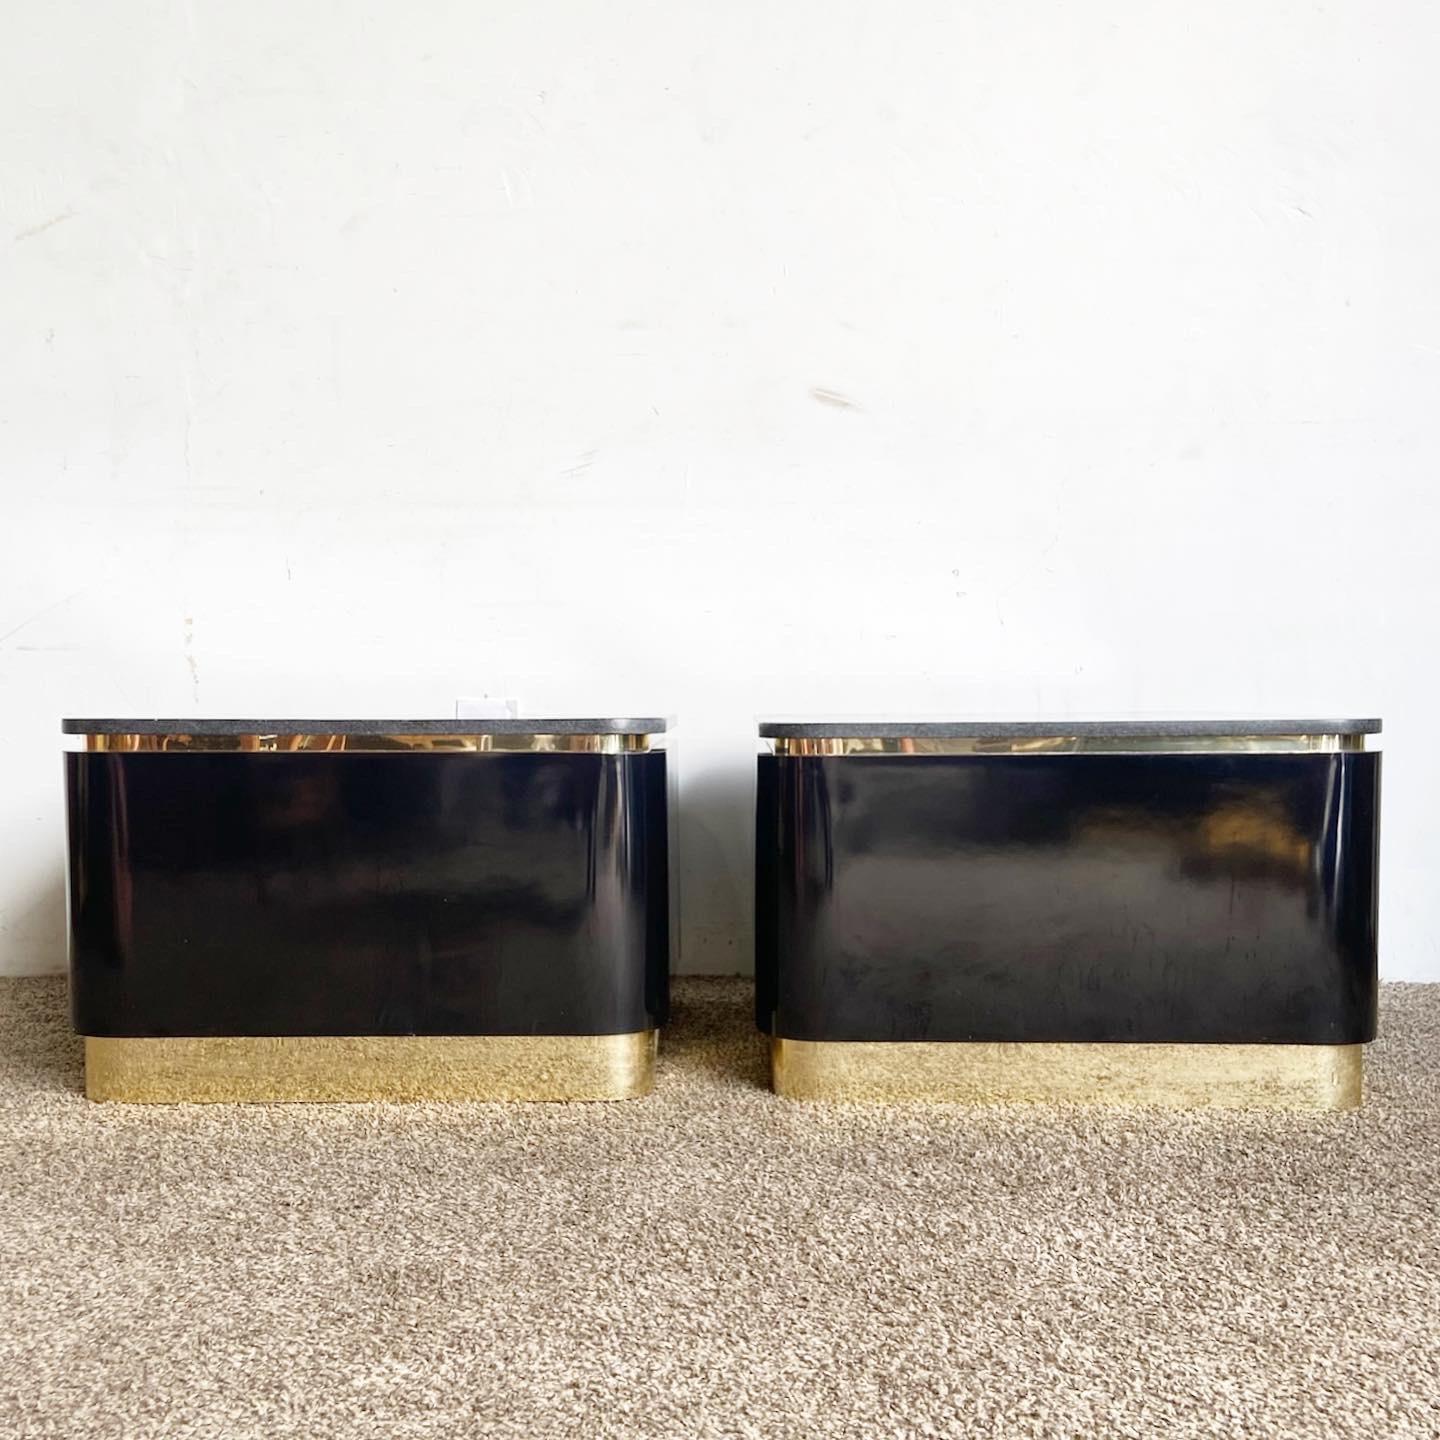 Elevate your living space with this exquisite pair of Postmodern Granite Gold Side Tables. Each table pairs a luxurious granite top with a black lacquer laminate base, and is accented with gold trim, combining functionality with dramatic, lavish